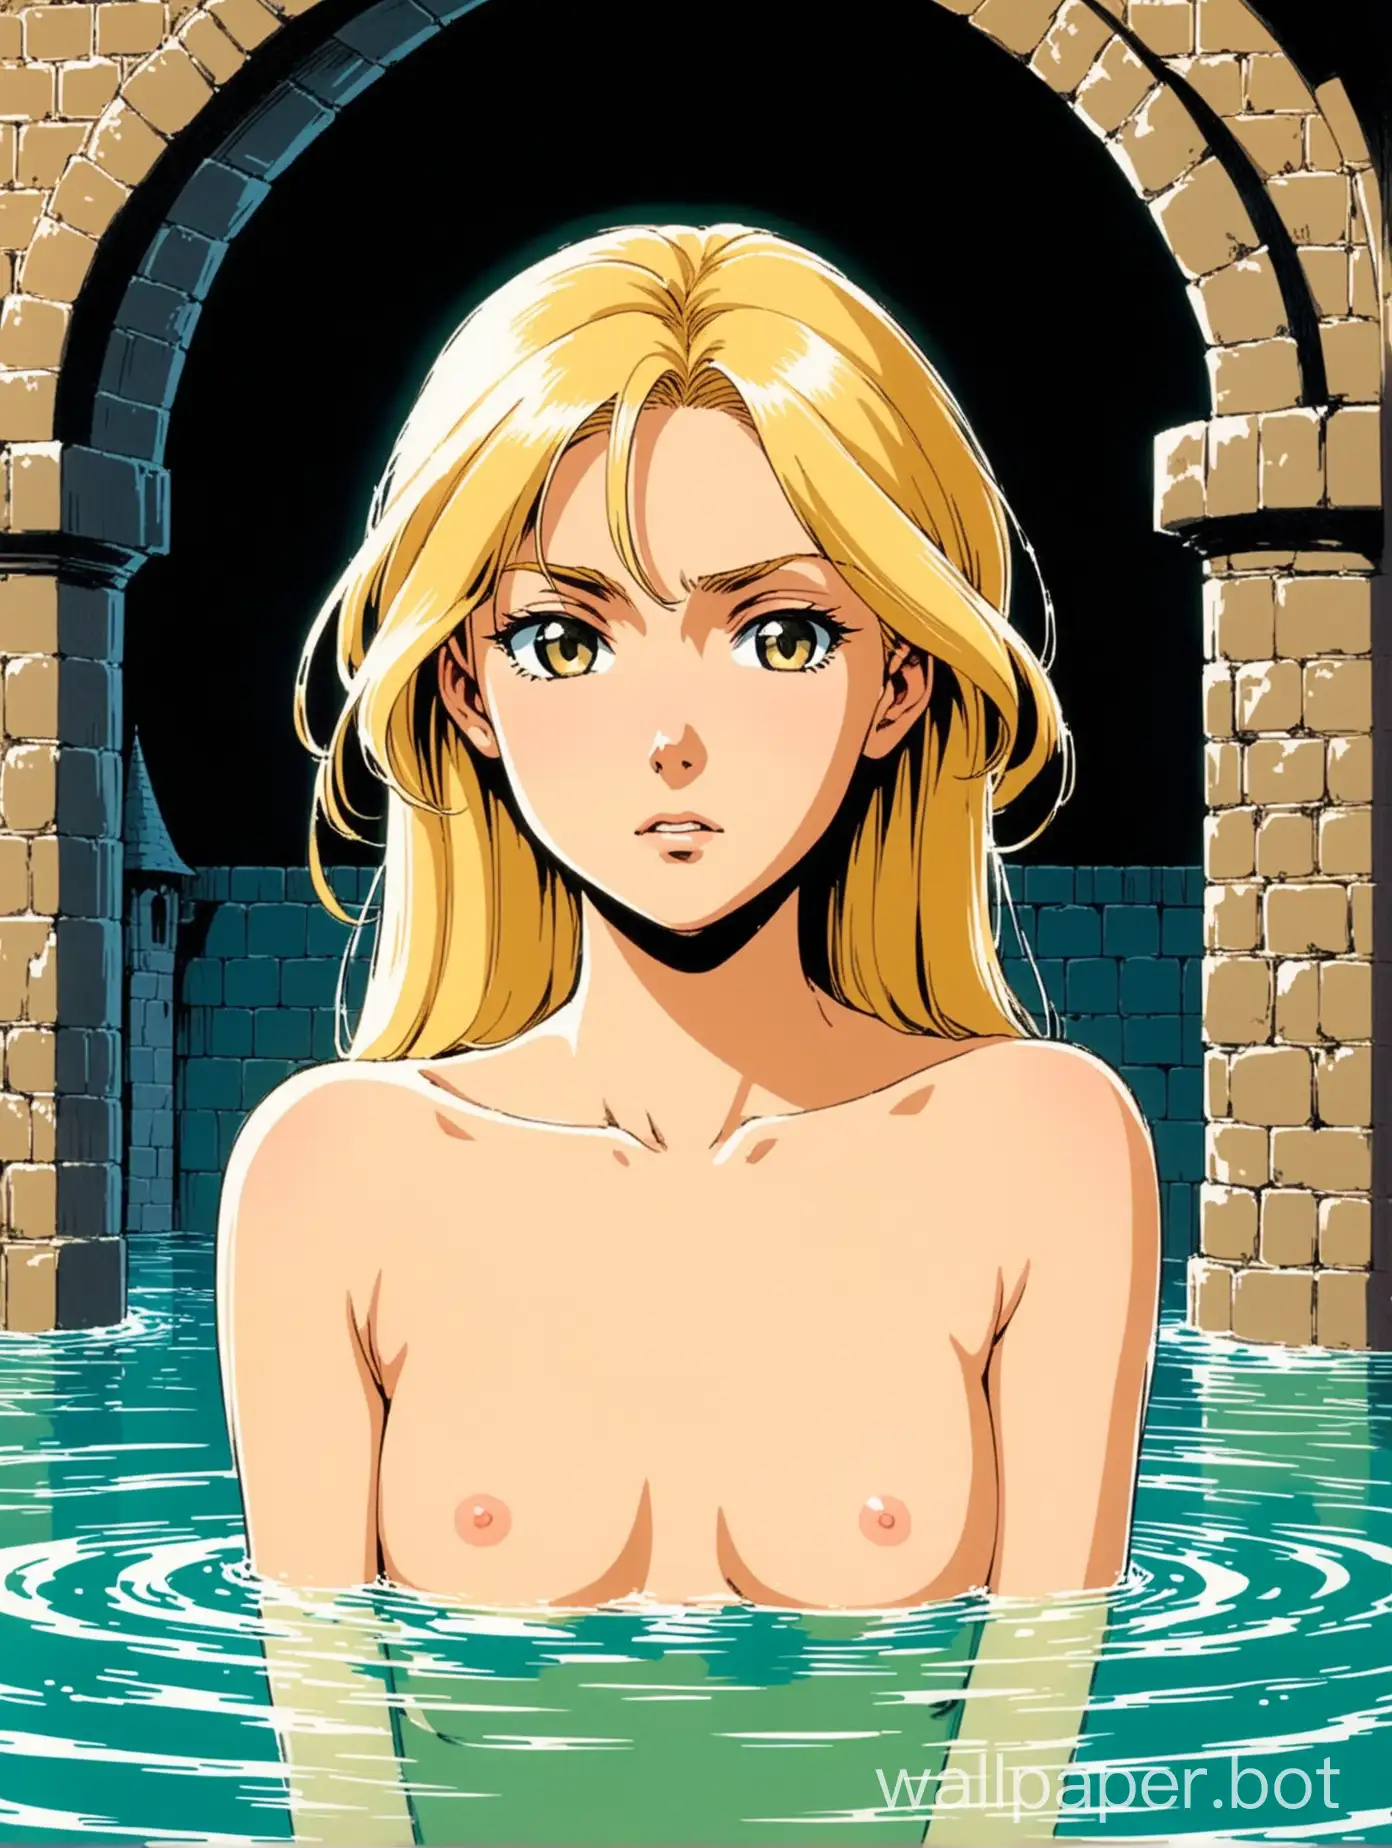 portrait of a beautiful naked young blonde woman bathing in a medieval bathhouse, halfway underwater, she is thin and elegant, youthful face, bitter facial expression, scowling, slender elegance, golden-blonde hair that is parted in the middle, she is thin and skinny, 1980s retro anime, medieval elegance, castle interior